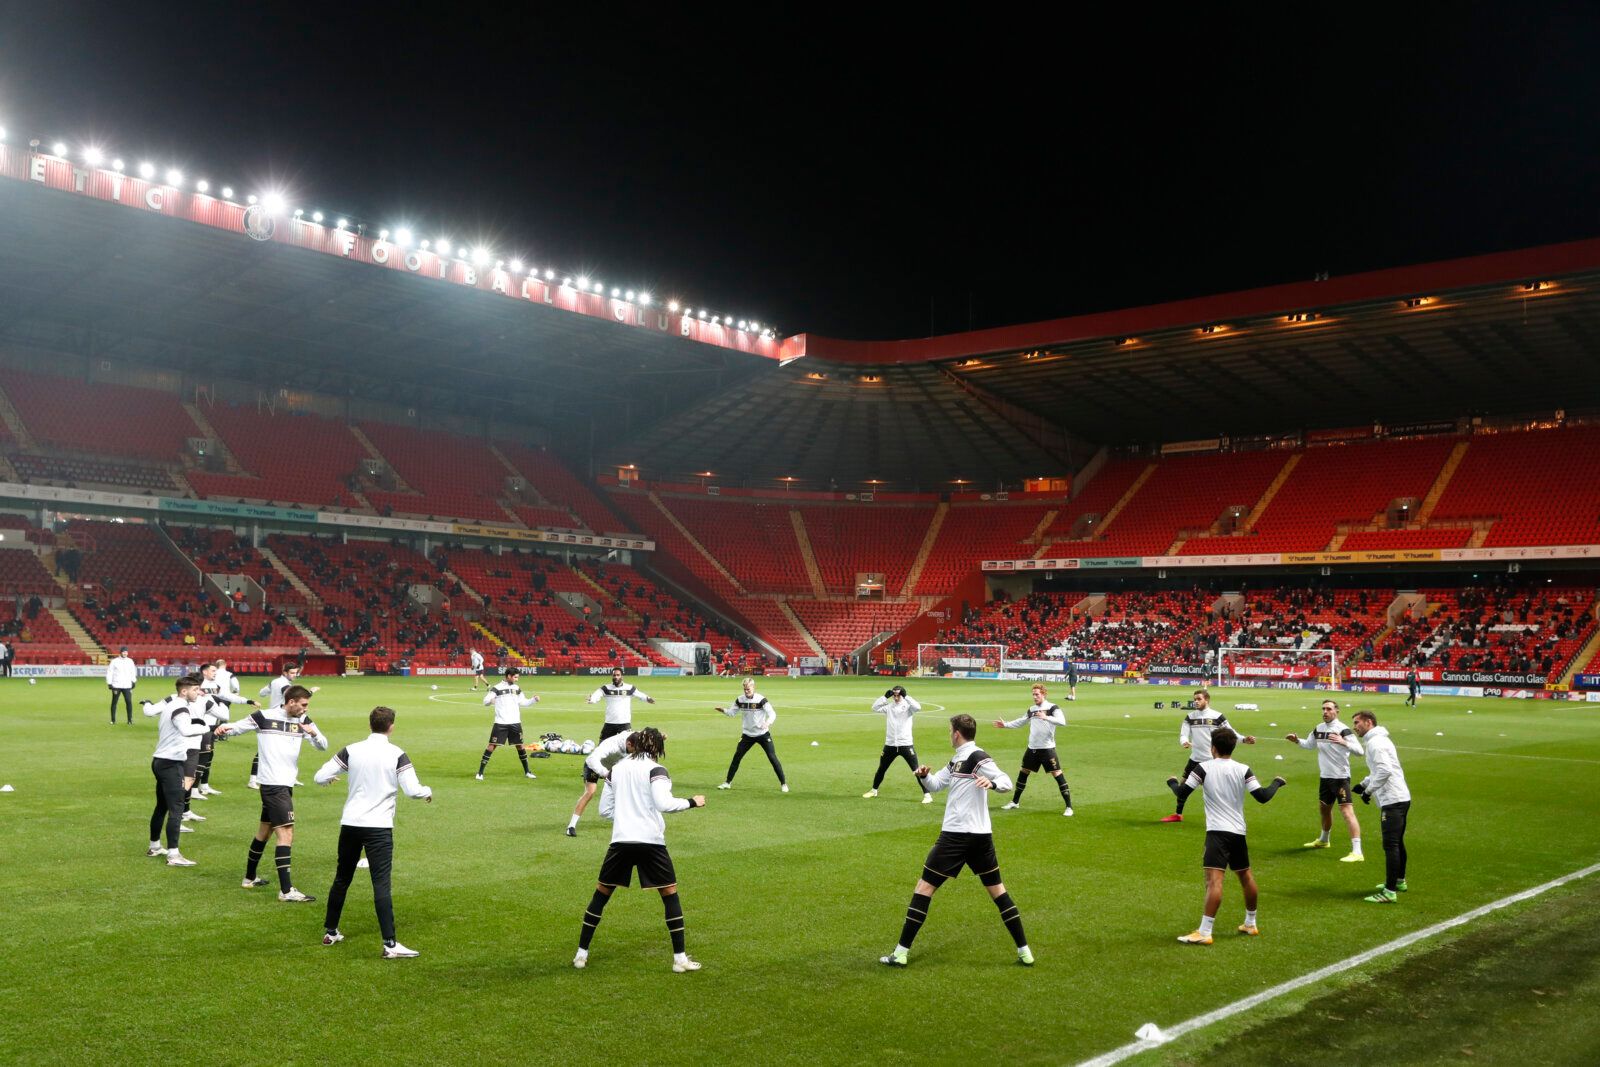 Soccer Football - League One - Charlton Athletic v Milton Keynes Dons - The Valley, London, Britain - December 2, 2020 General view during the warm up before the match Action Images/Matthew Childs EDITORIAL USE ONLY. No use with unauthorized audio, video, data, fixture lists, club/league logos or 'live' services. Online in-match use limited to 75 images, no video emulation. No use in betting, games or single club /league/player publications.  Please contact your account representative for furthe